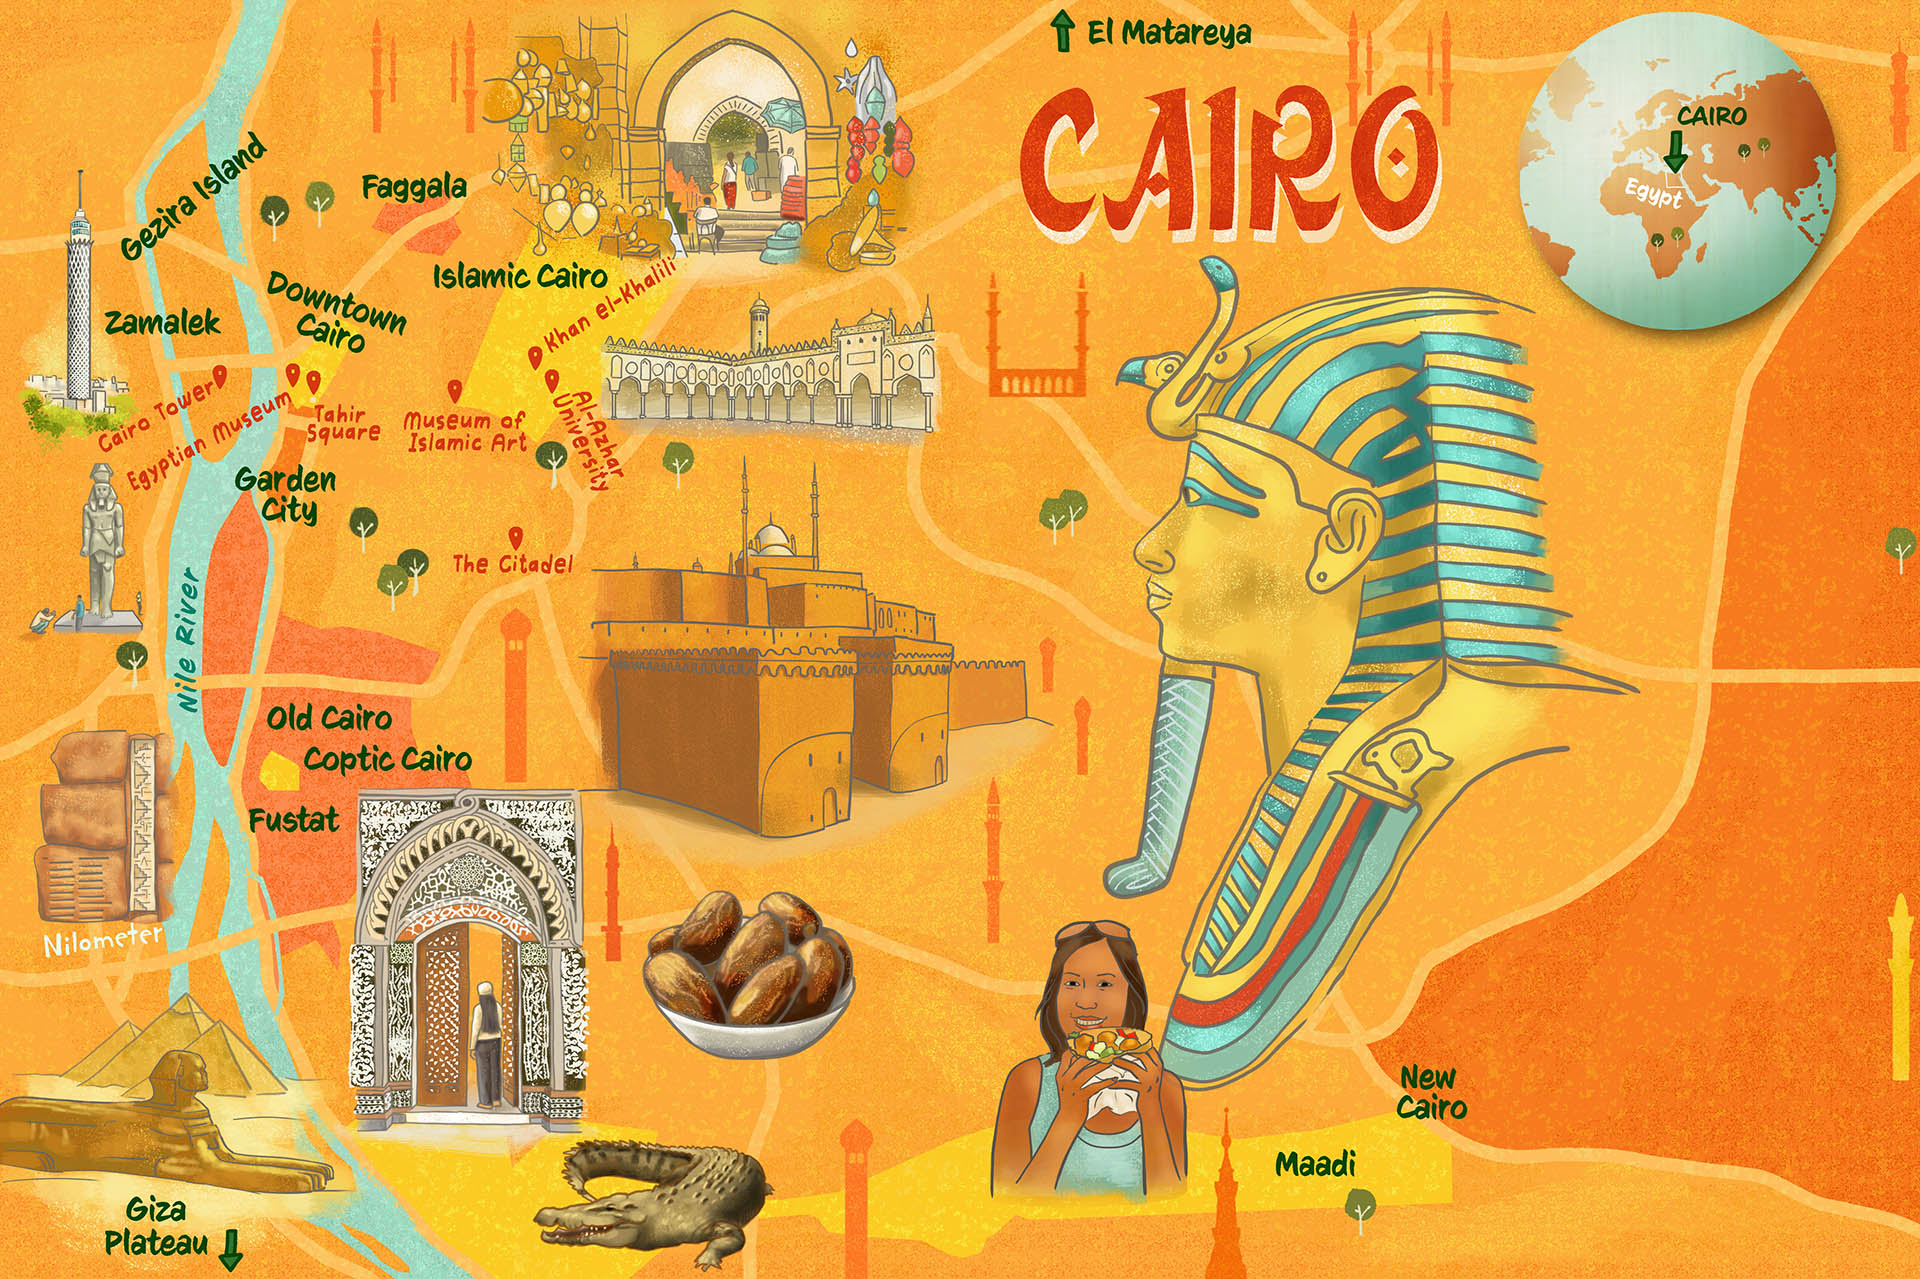 Map of Cairo • Project: Faces Magazine